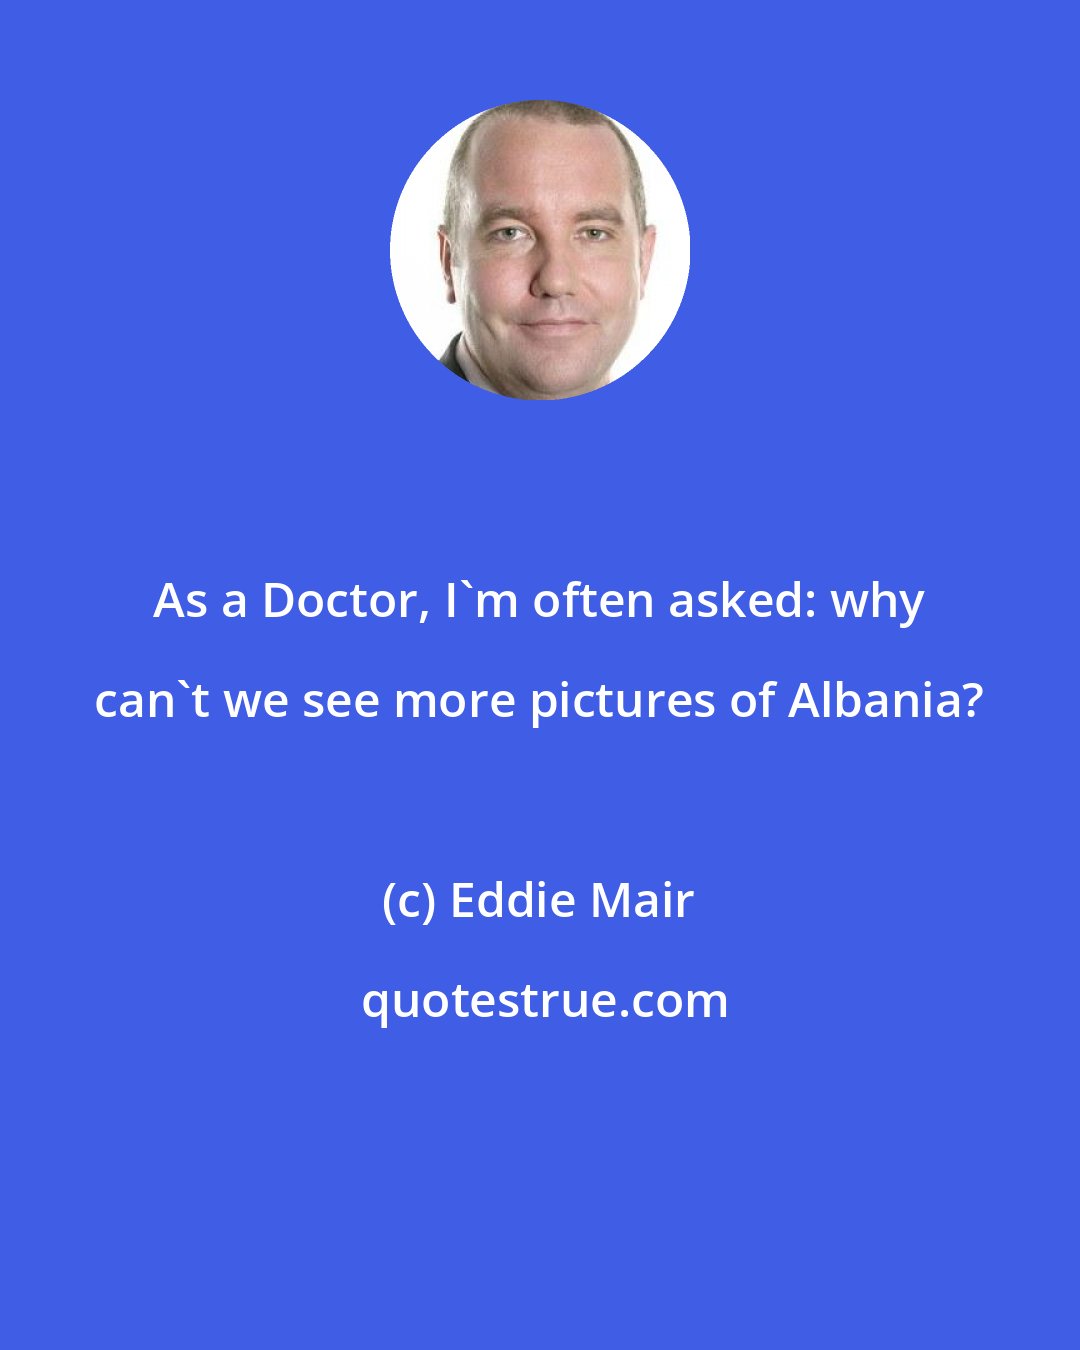 Eddie Mair: As a Doctor, I'm often asked: why can't we see more pictures of Albania?